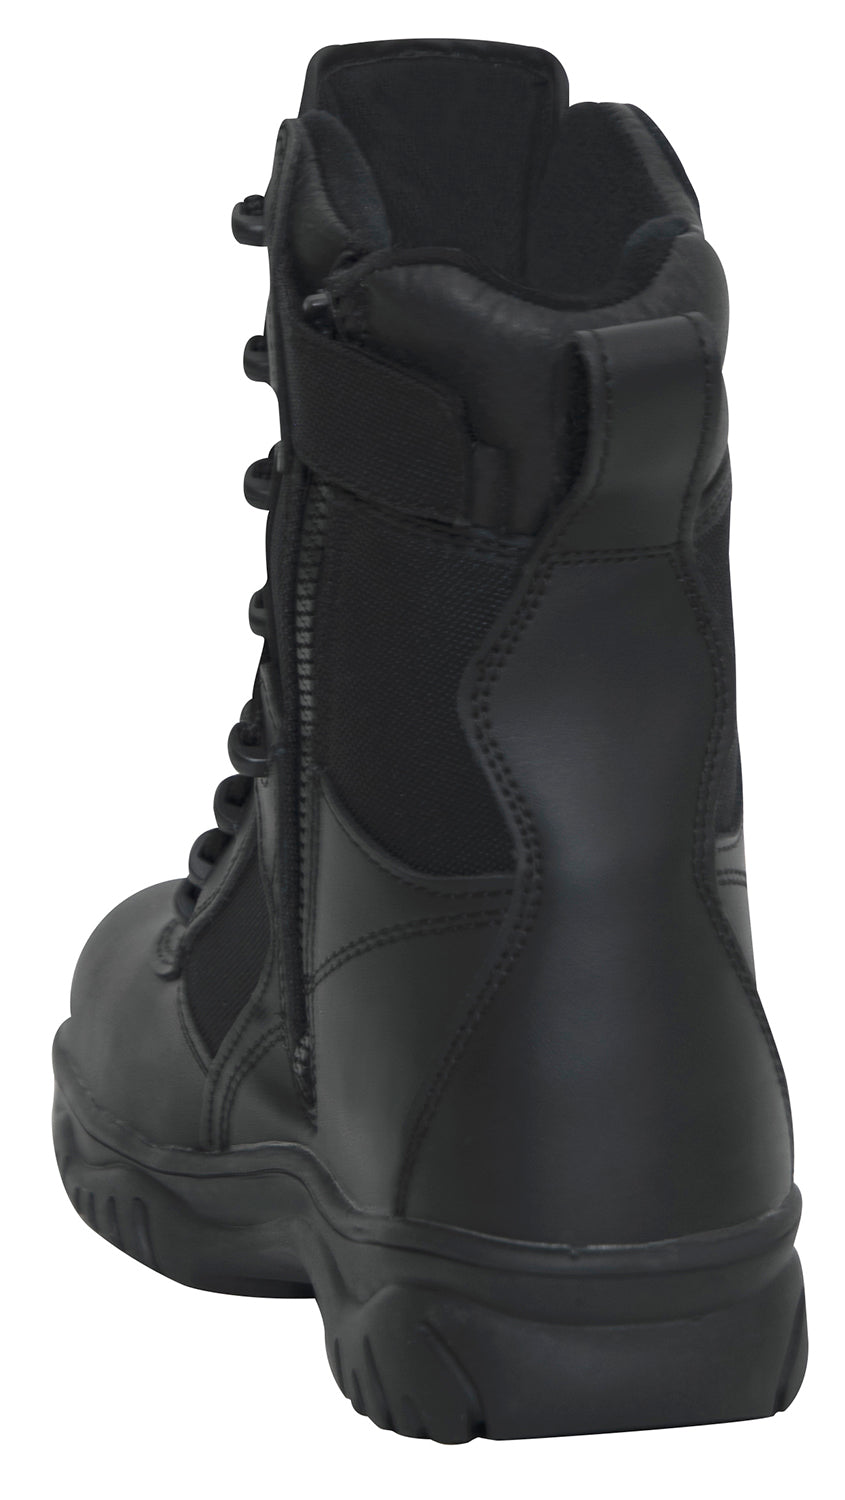 Forced Entry 8" Black Tactical Boot W/ Side Zipper & Composite Toe - Police SWAT